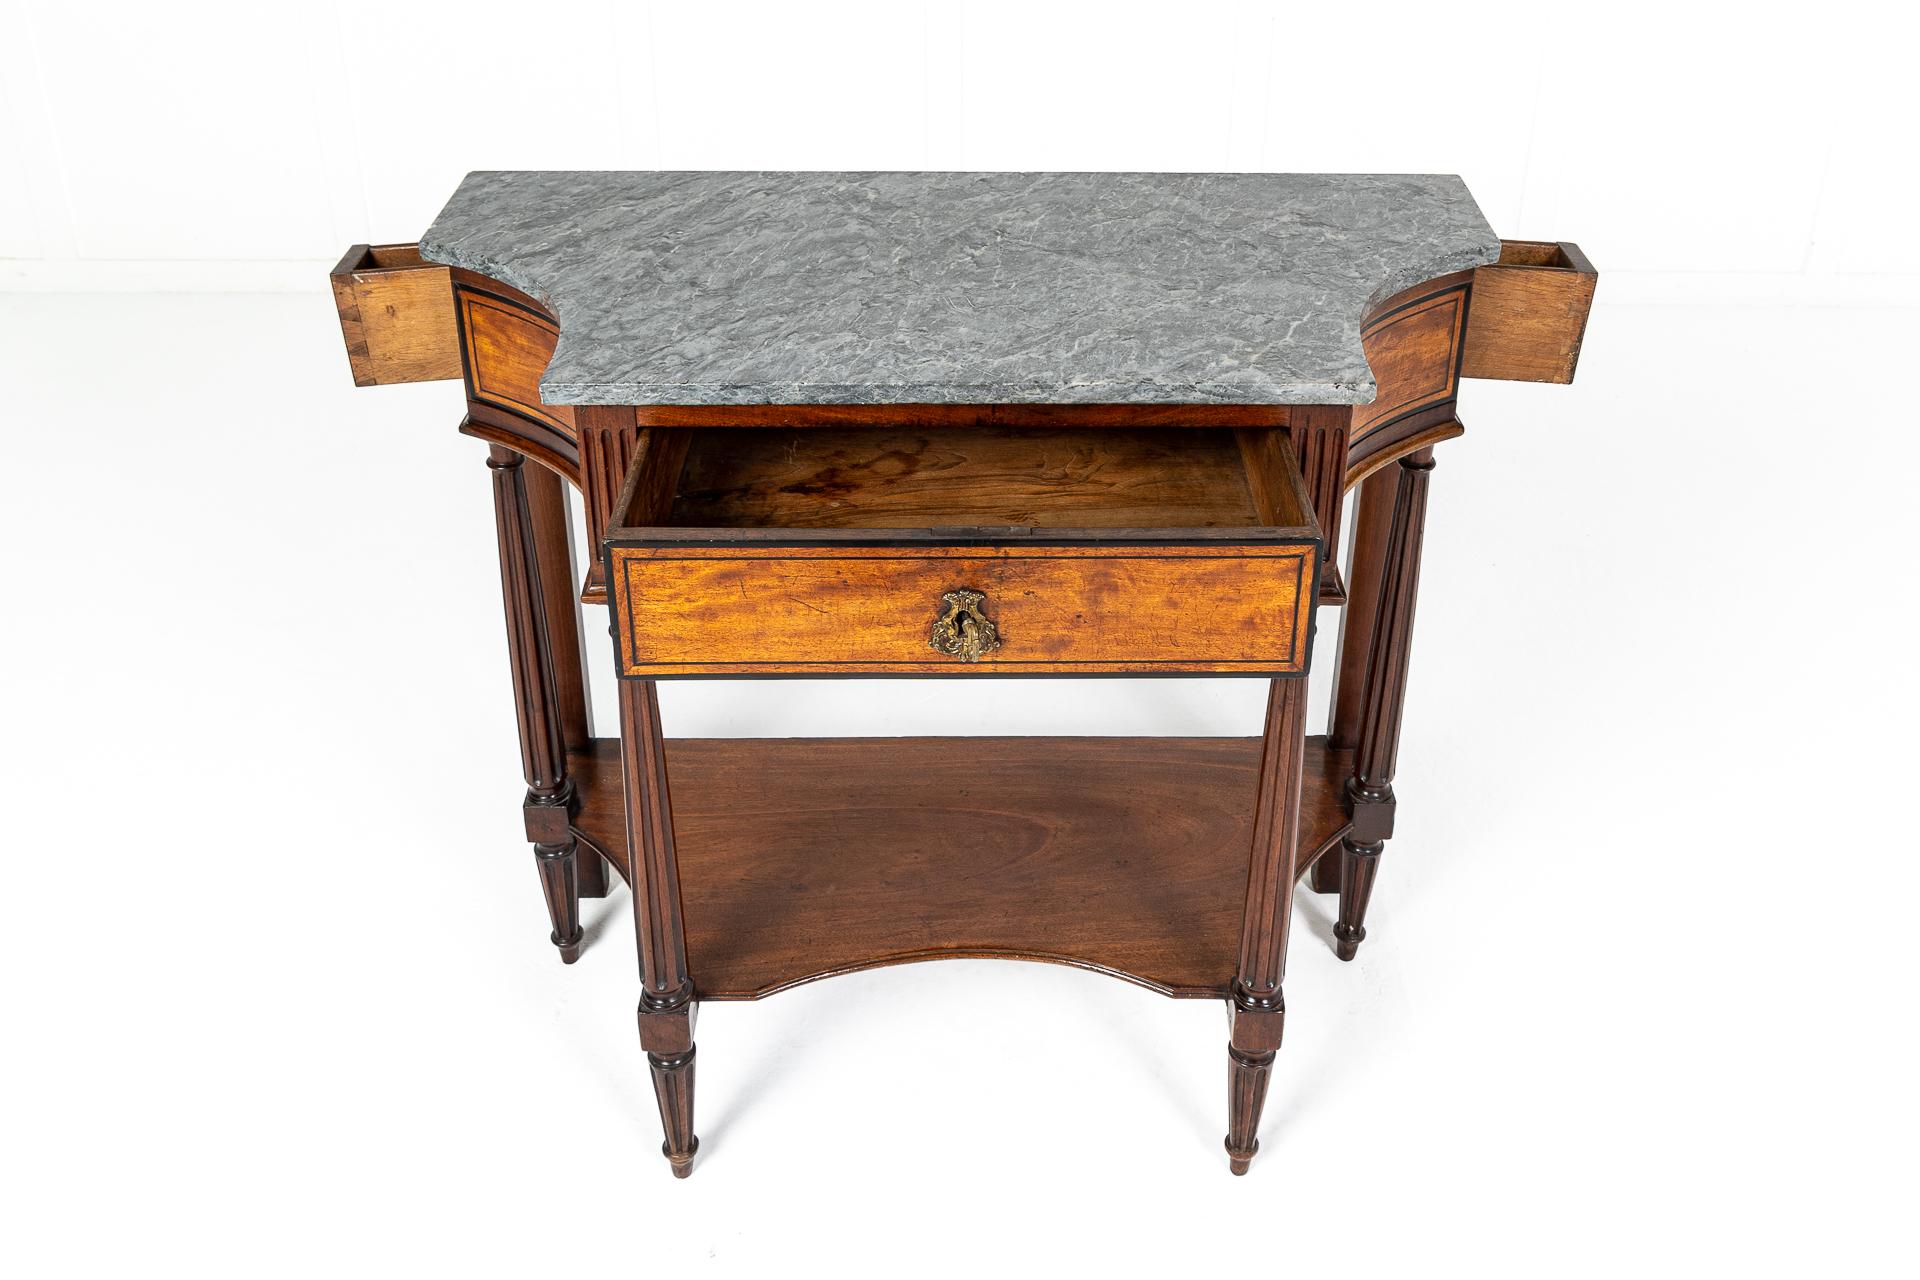 An unusual model of an early 19th century French walnut and satinwood console table having a nice original grey and white veined marble top conforming to the interesting concave sides of the table. The deep frieze has ebony inlayed drawers and